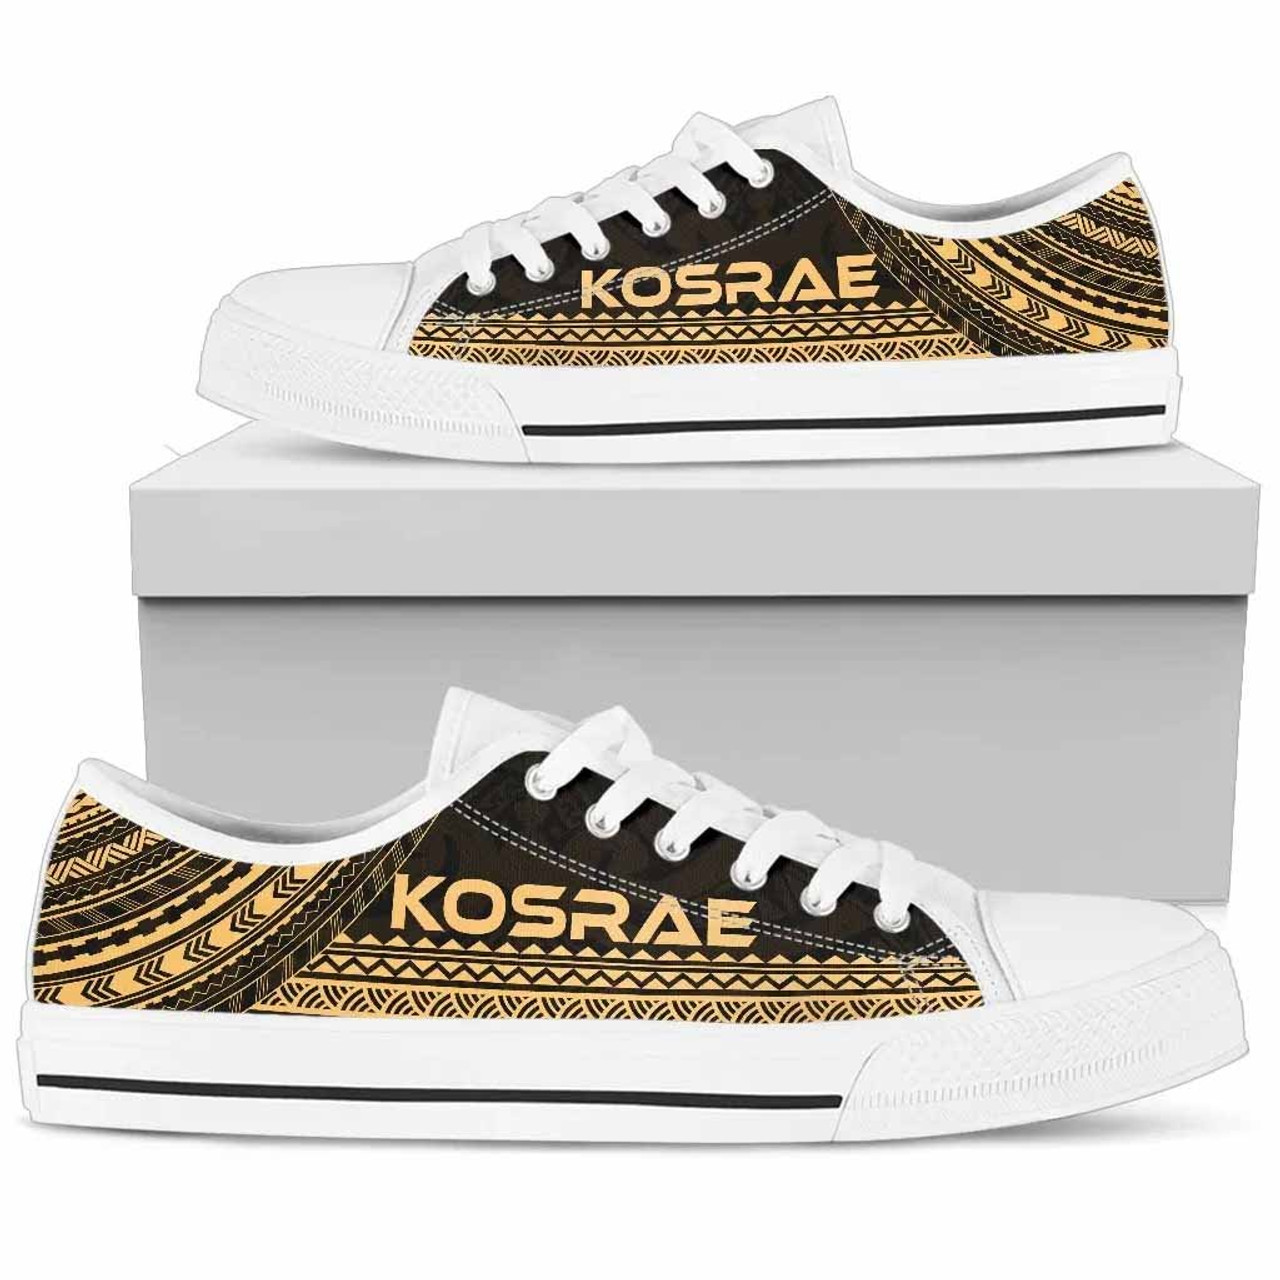 Kosrae Low Top Shoes - Polynesian Gold Chief Version 3